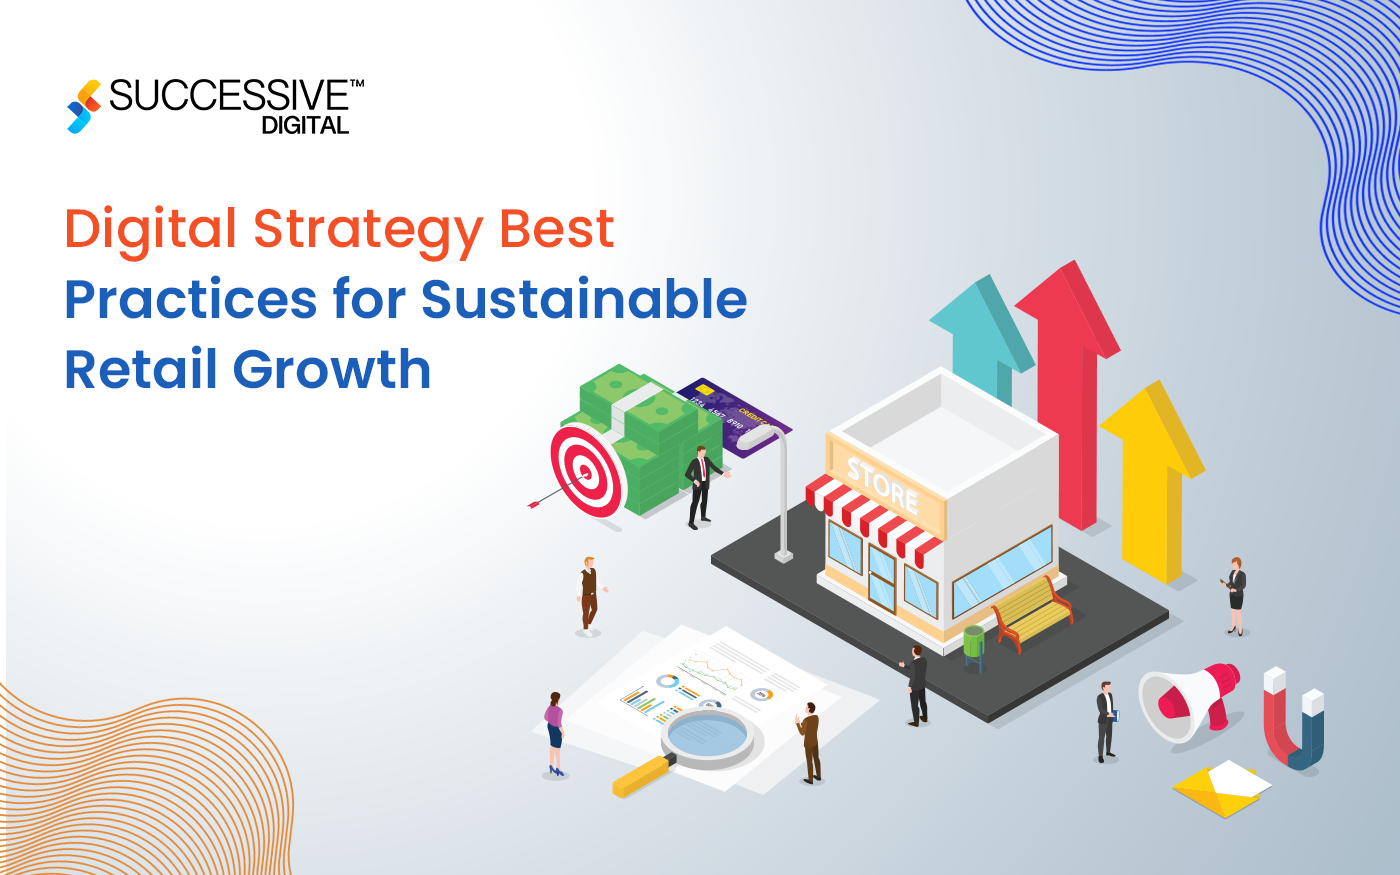 Digital Strategy Best Practices for Sustainable Retail Growth